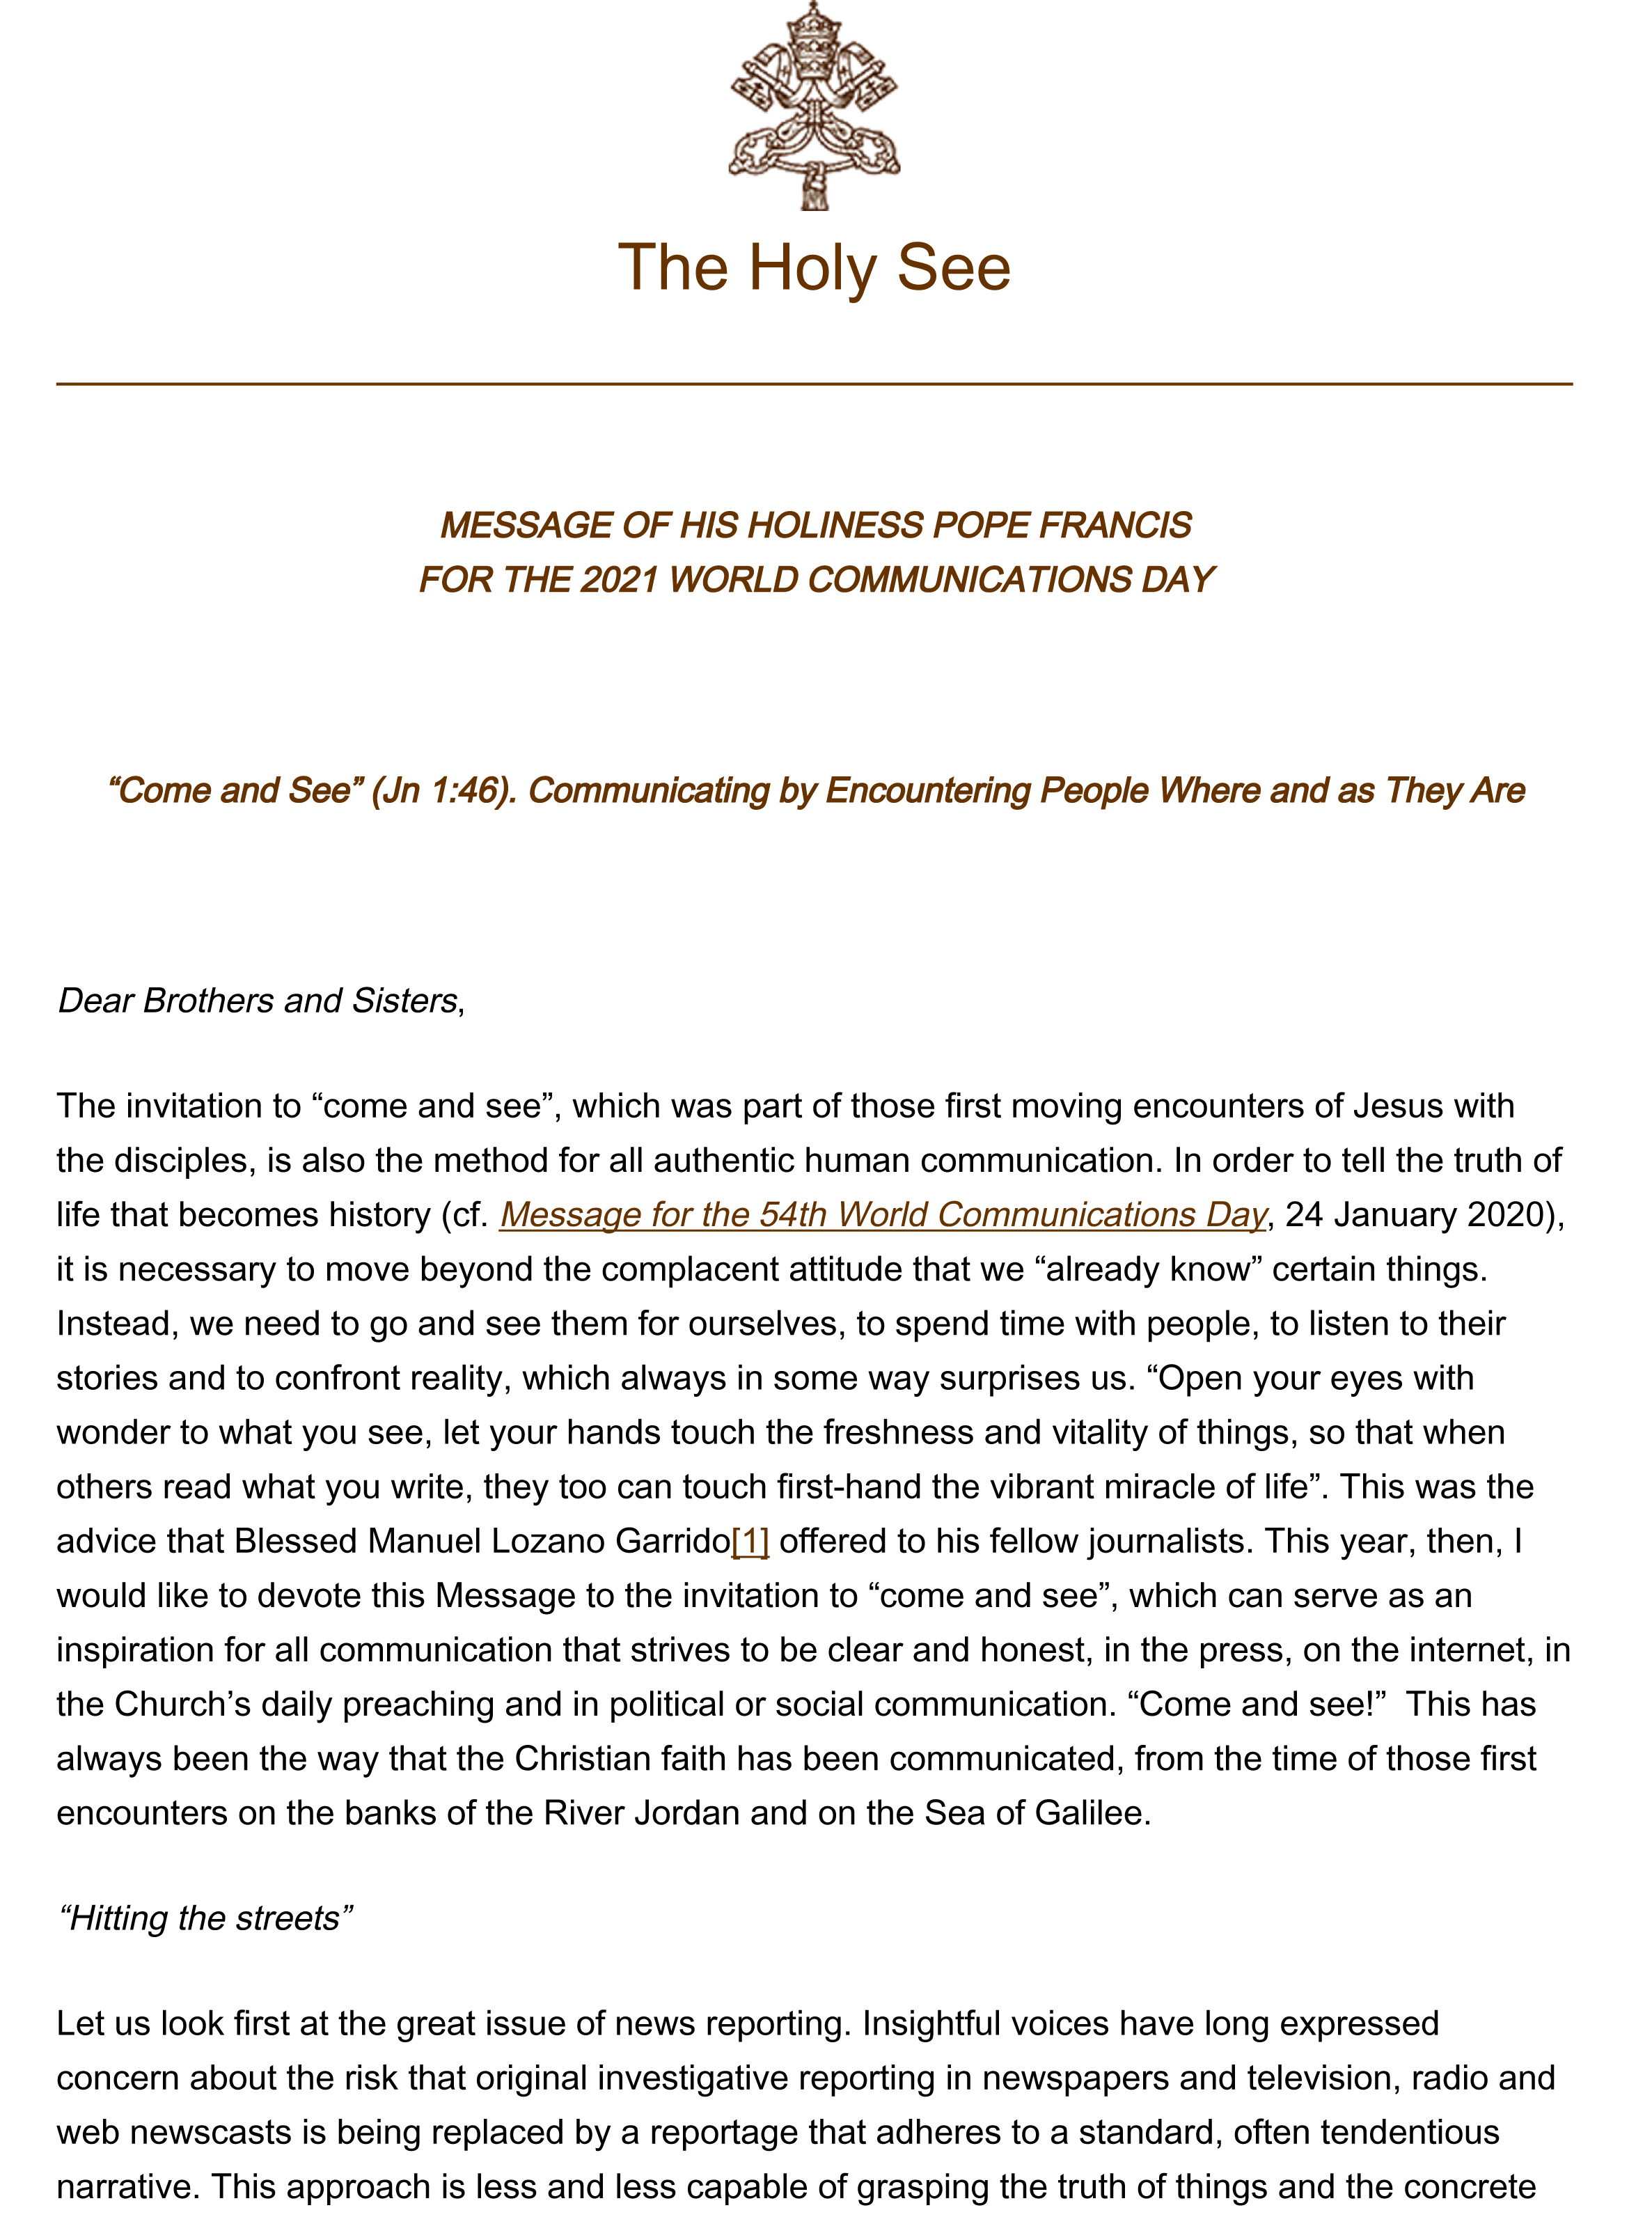 Pope Francis' message for World Communications Day